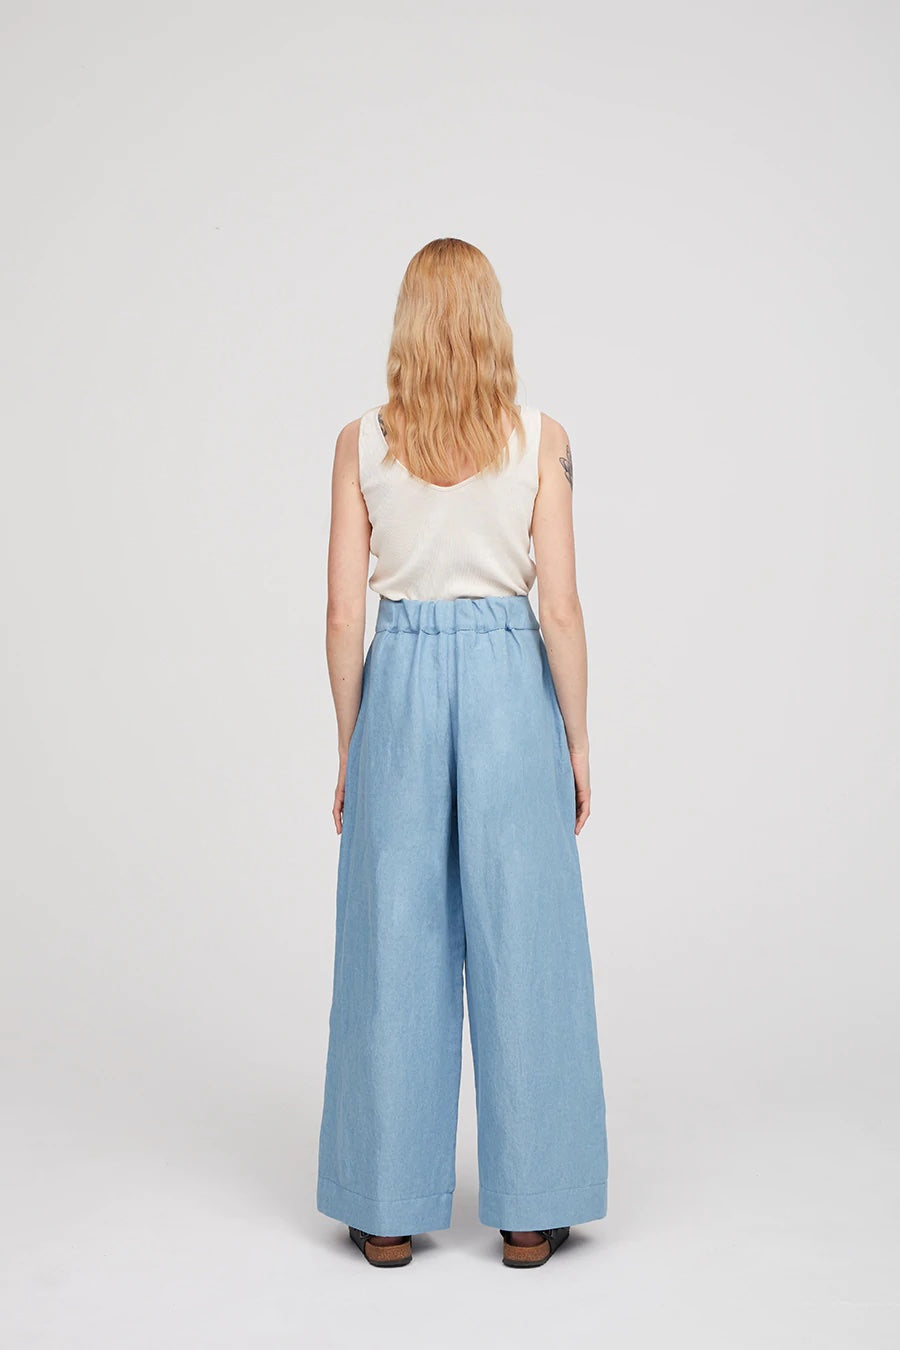 The Modern Sewing Co. Spring Trousers